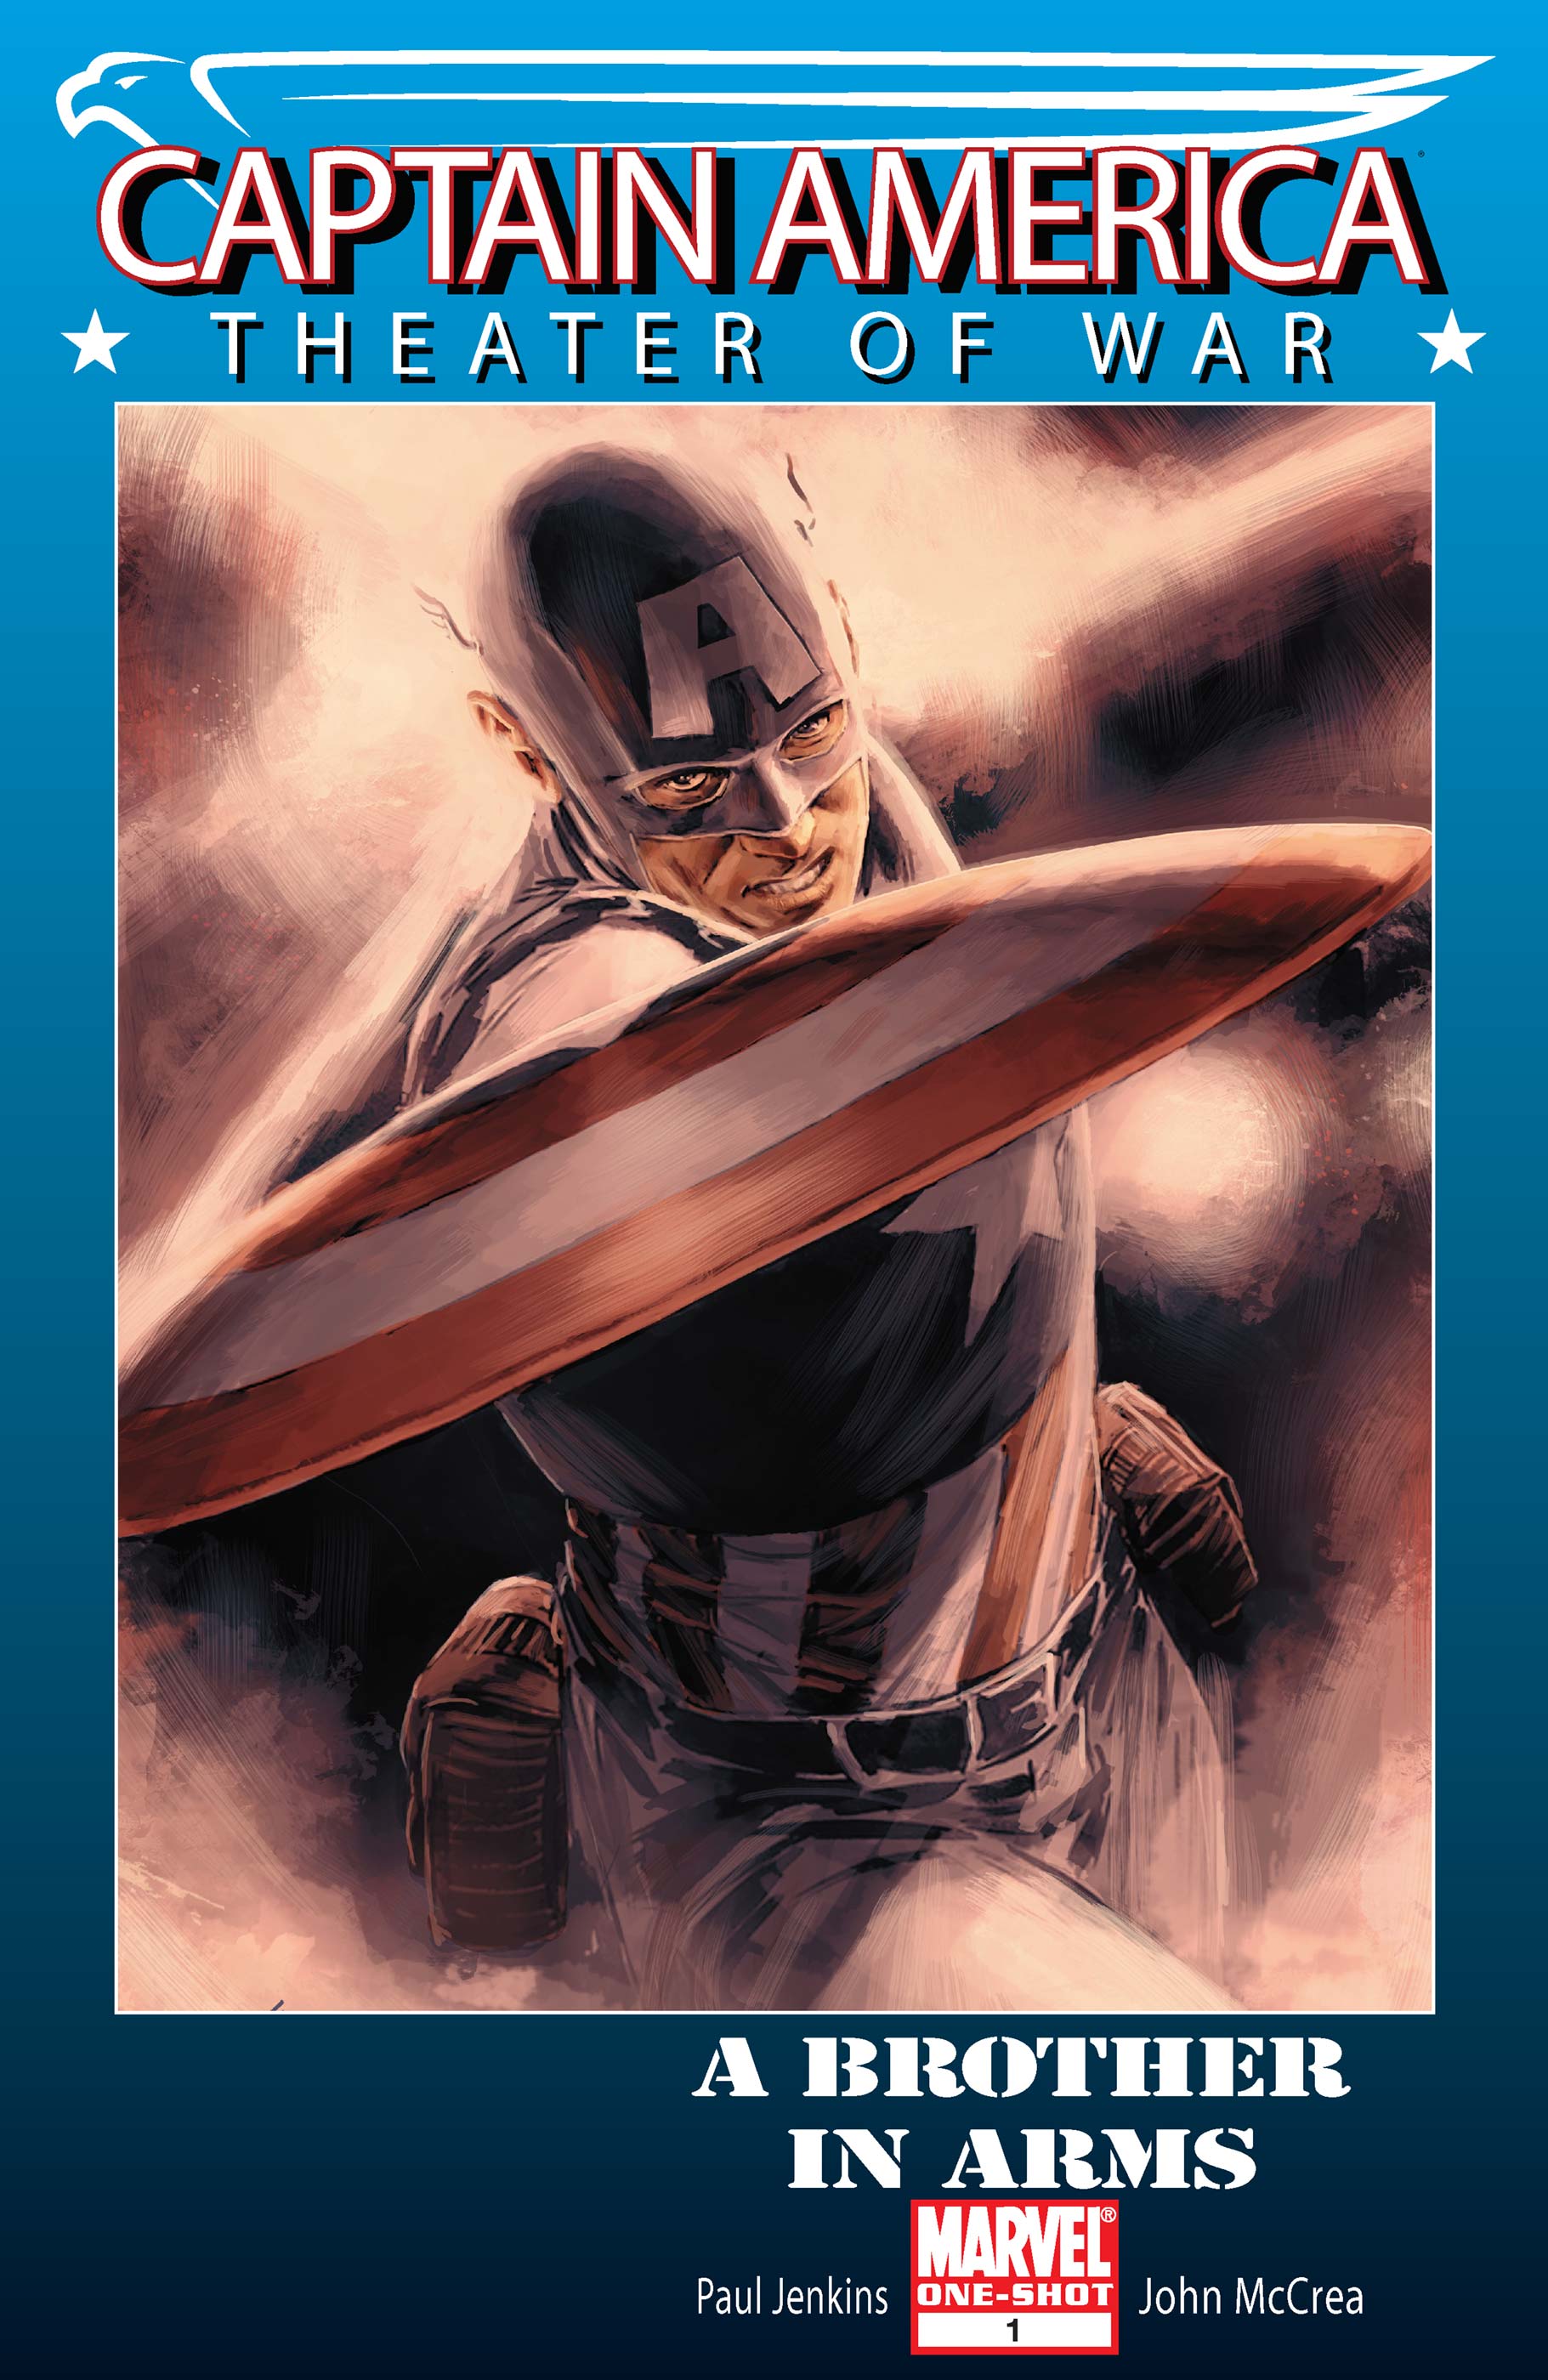 Captain America Theater of War: A Brother in Arms (2009) #1